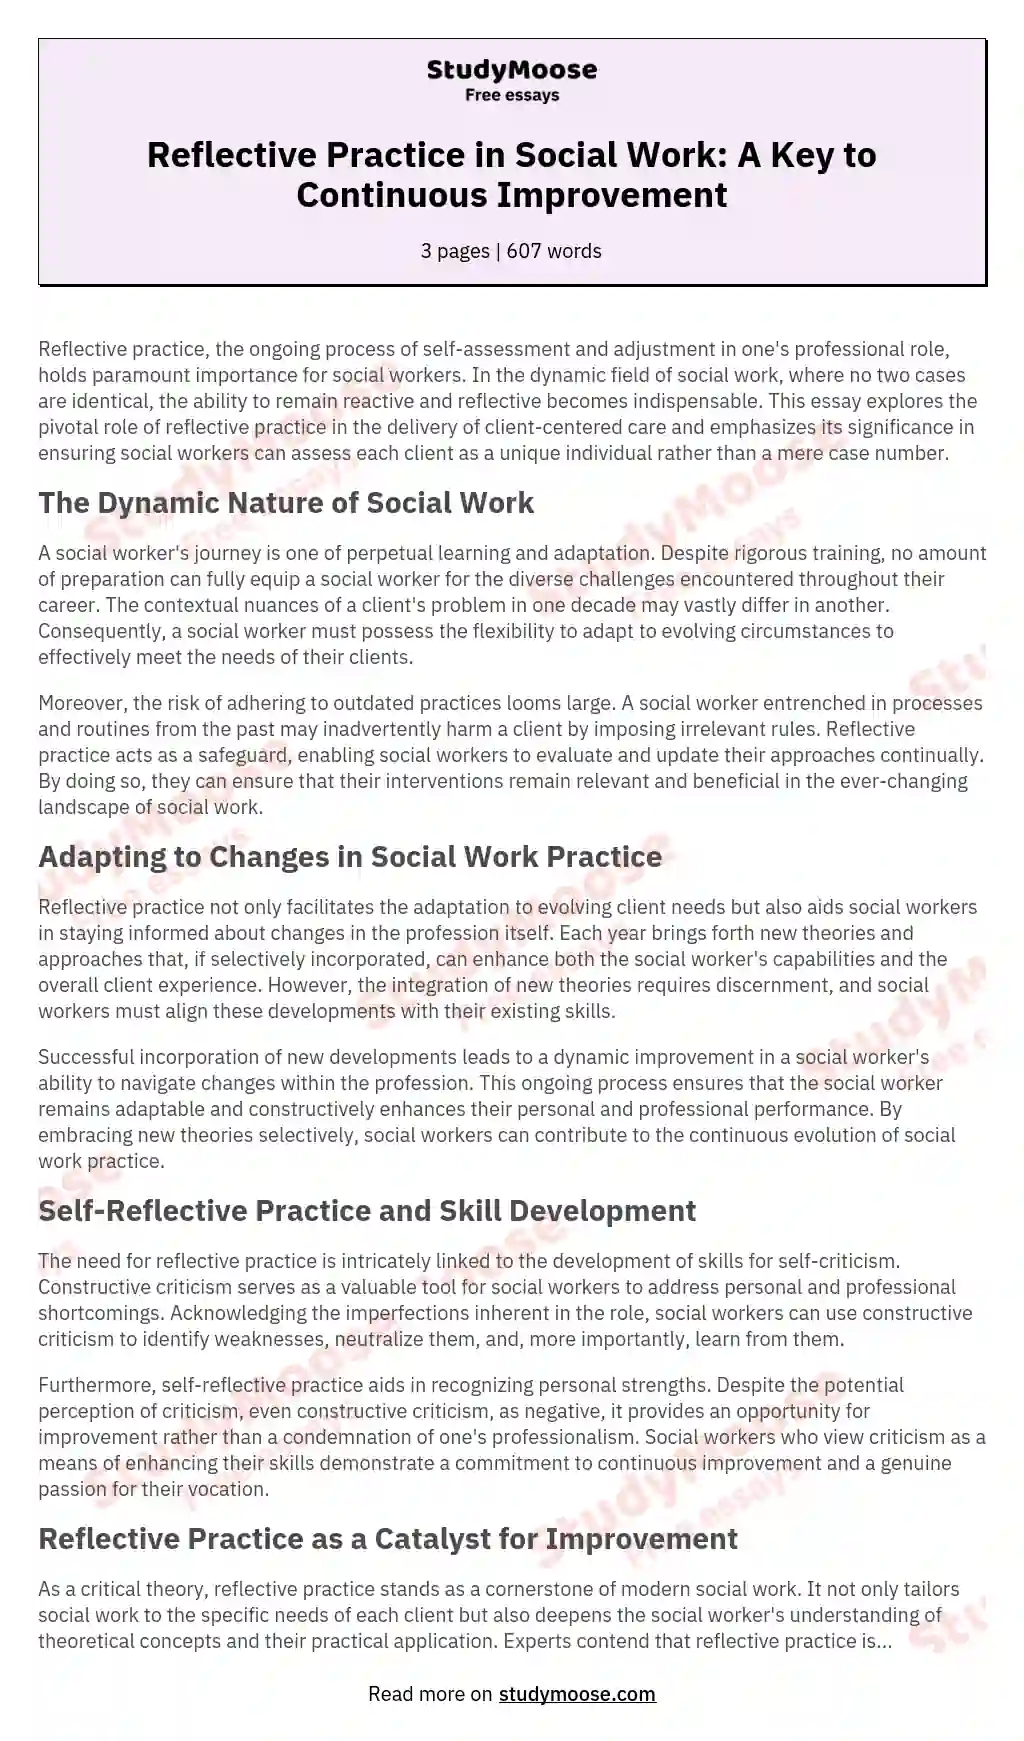 Reflective Practice in Social Work: A Key to Continuous Improvement essay